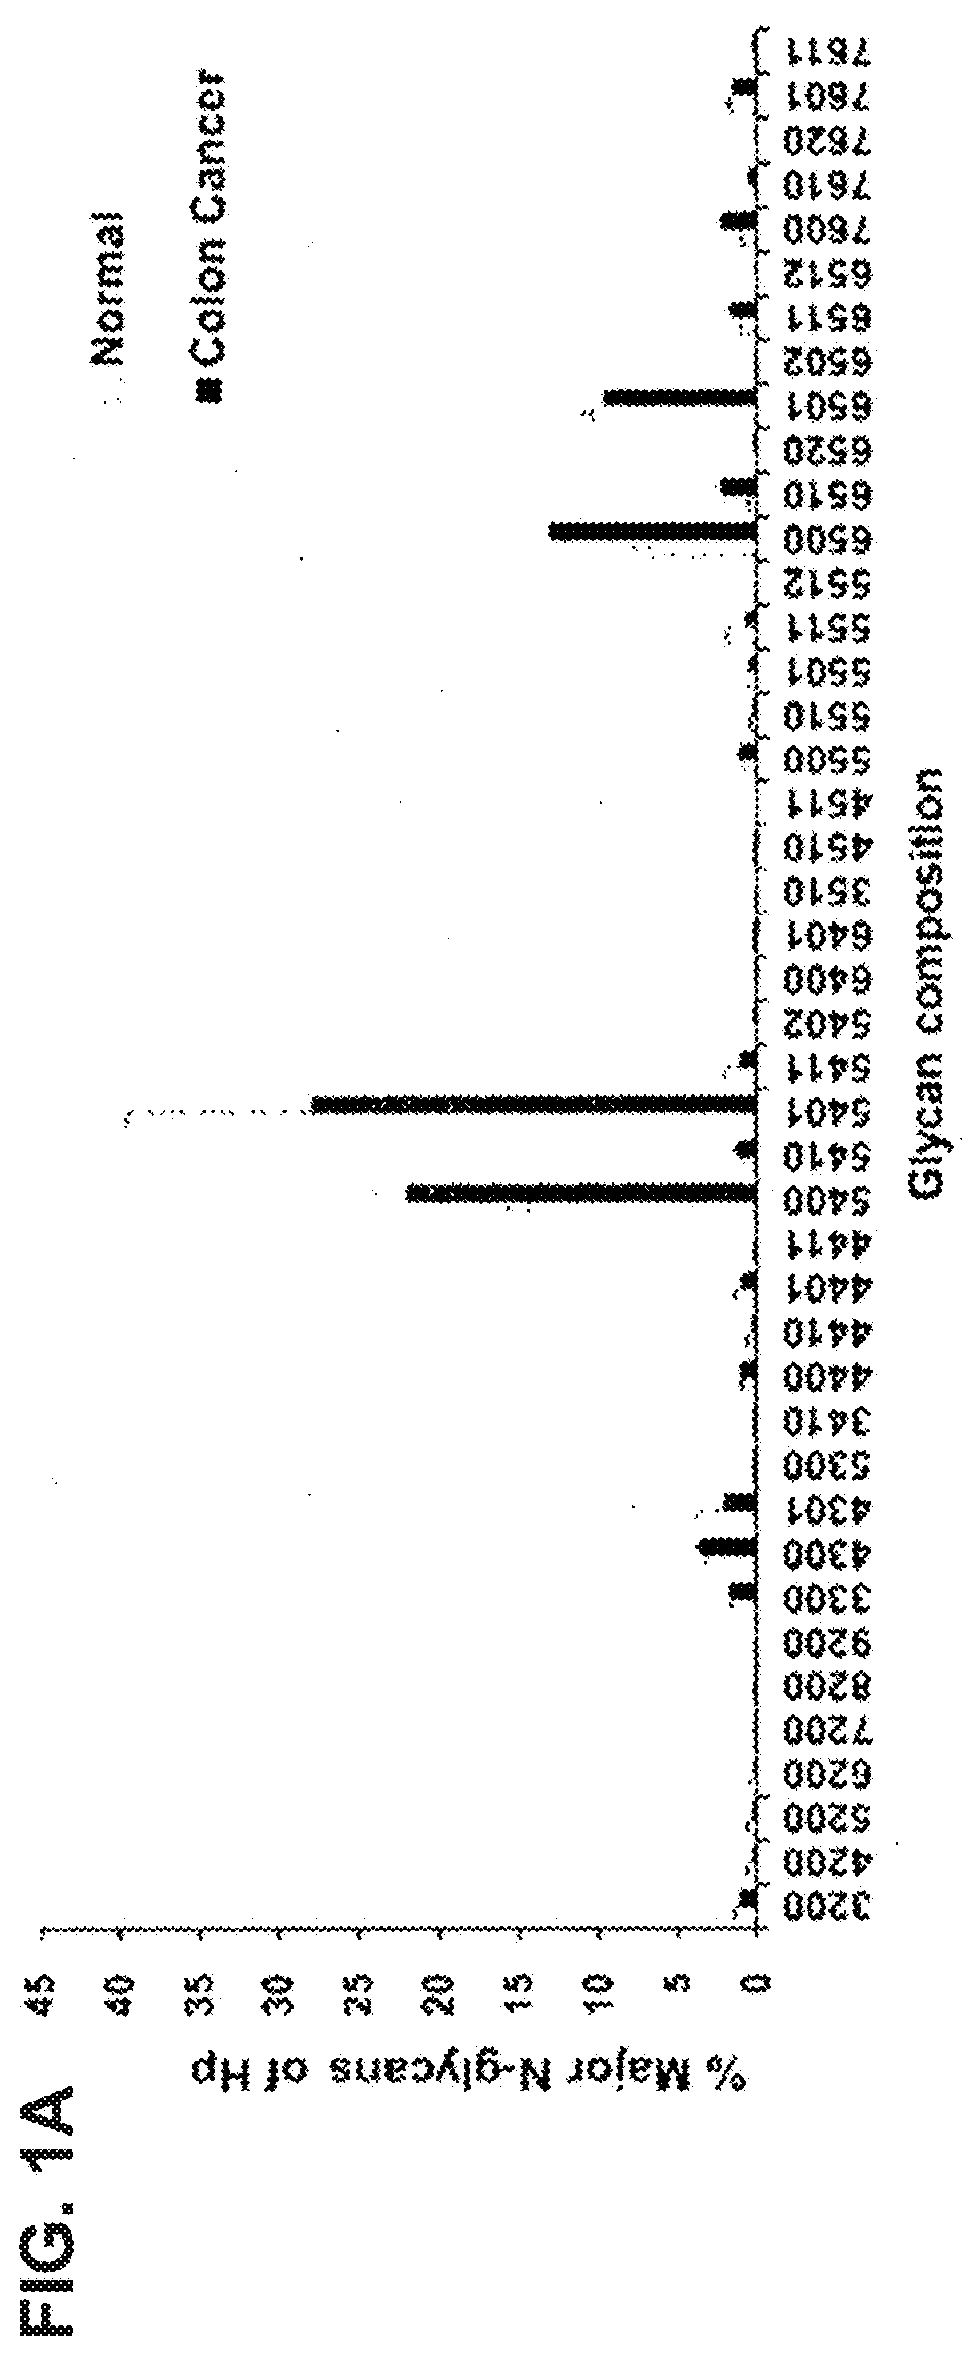 Method for diagnosis of colorectal cancer using mass spectrometry of n-glycans